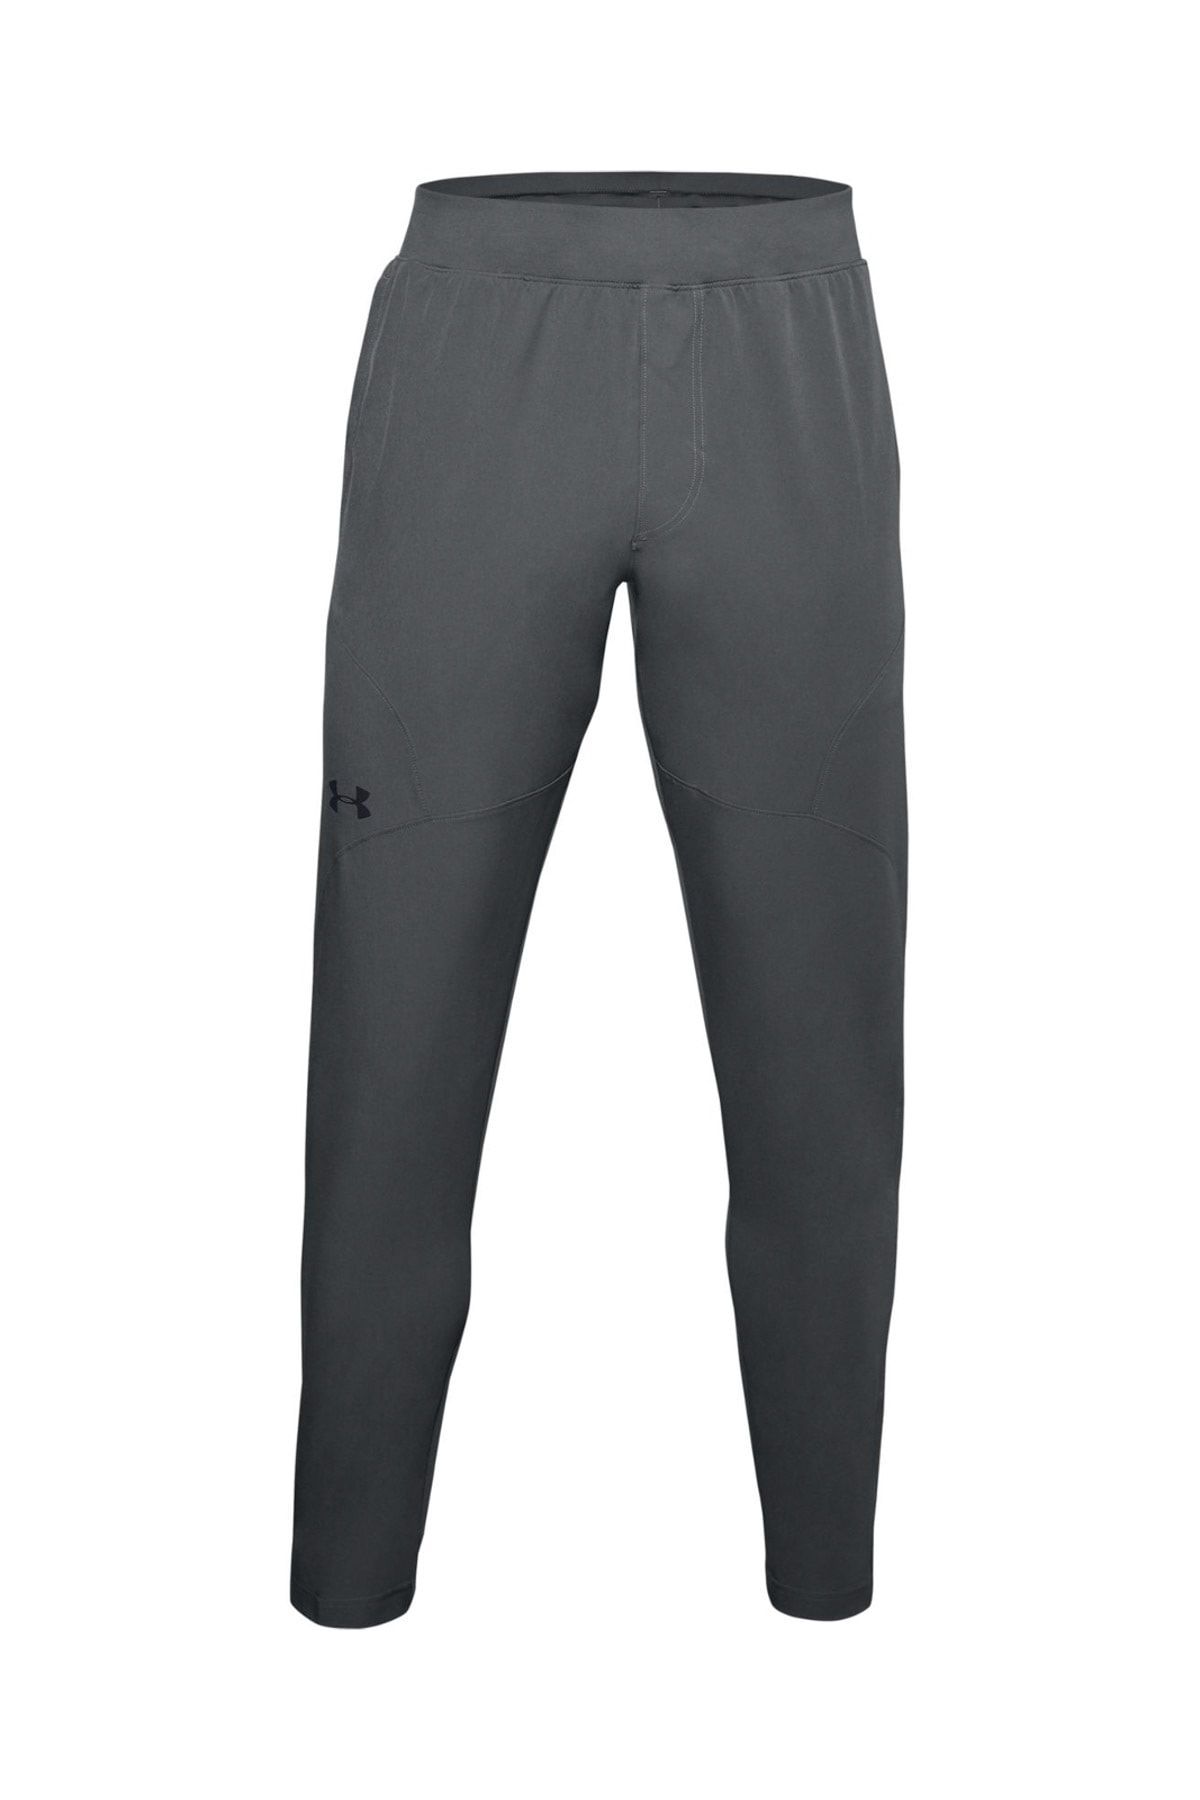 Under Armour Men's Flex Woven Tapered Pants